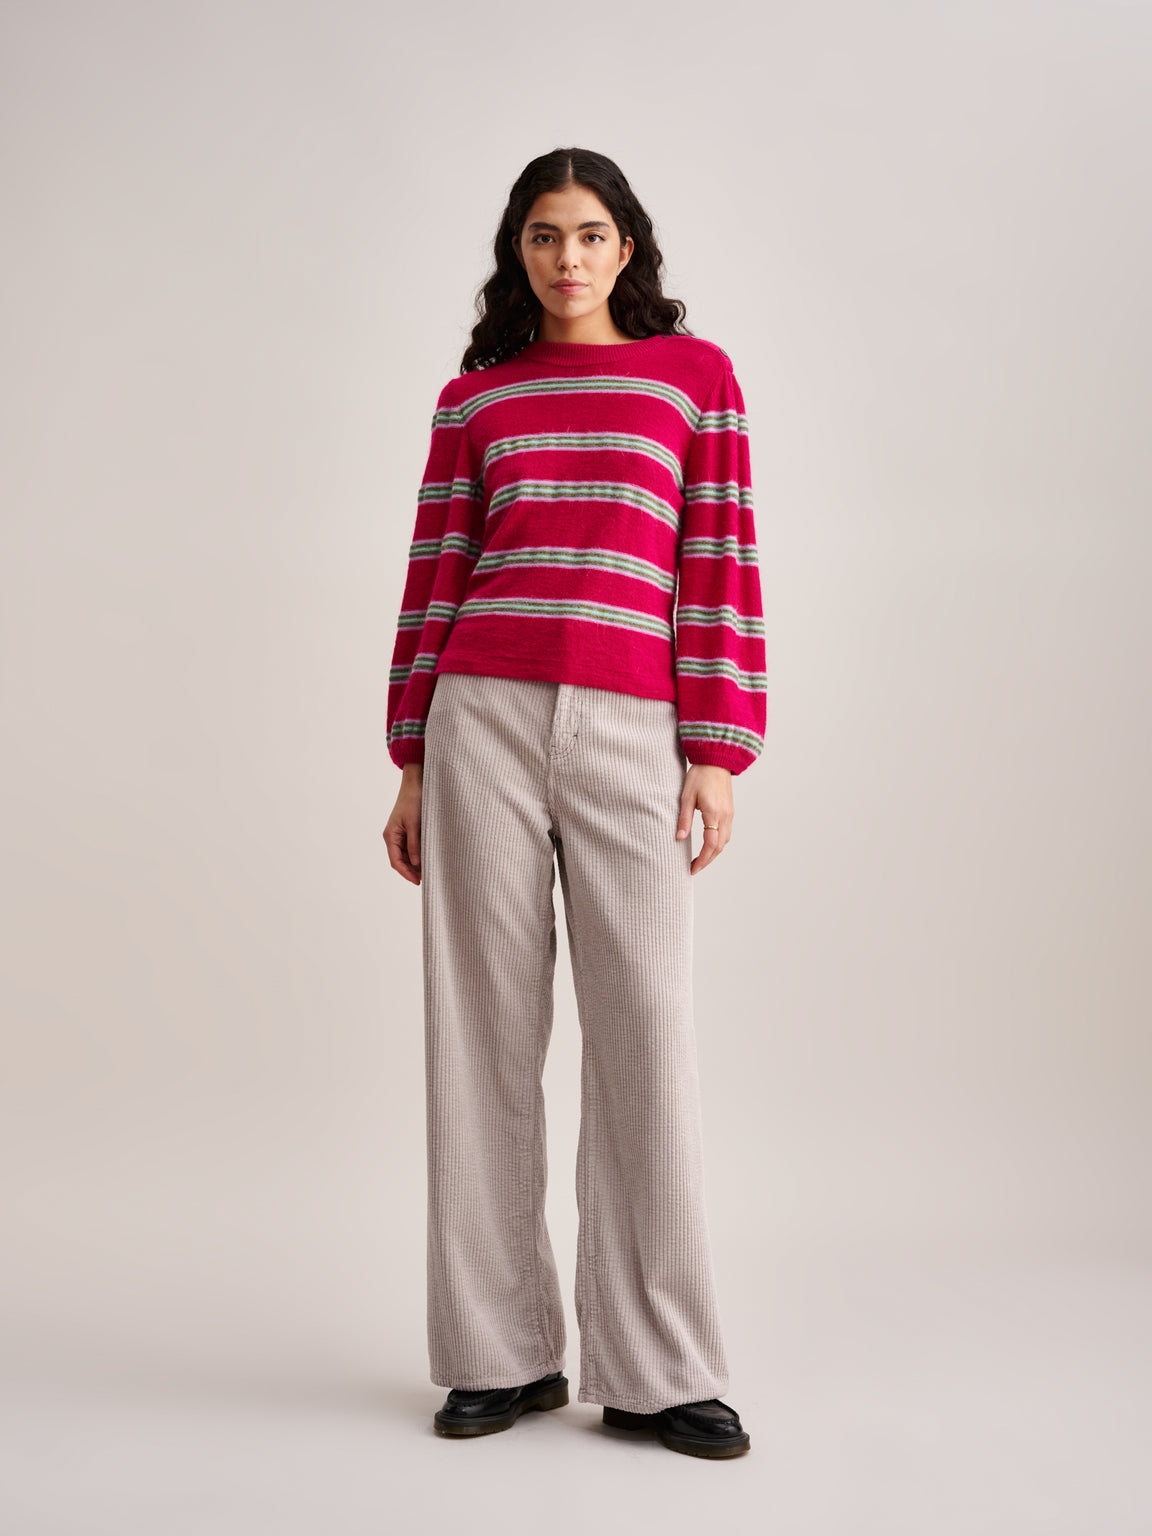 Pullover Diout K1468 Diout K1468s Stripe-A